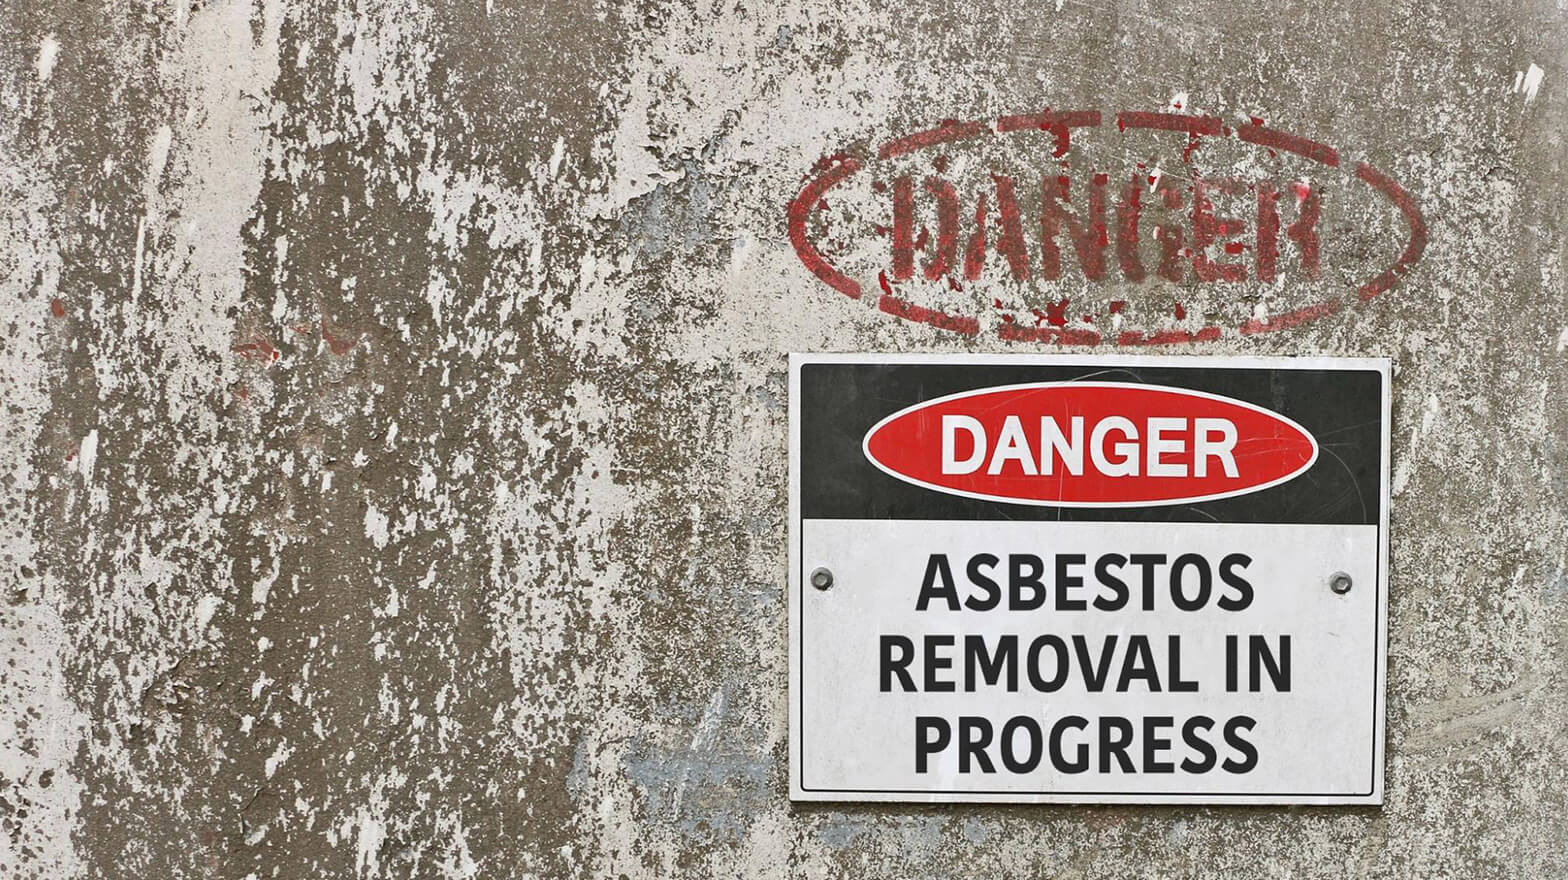 A signage saying “DANGER ASBESTOS REMOVAL IN PROGRESS,” which is an example of construction pollution